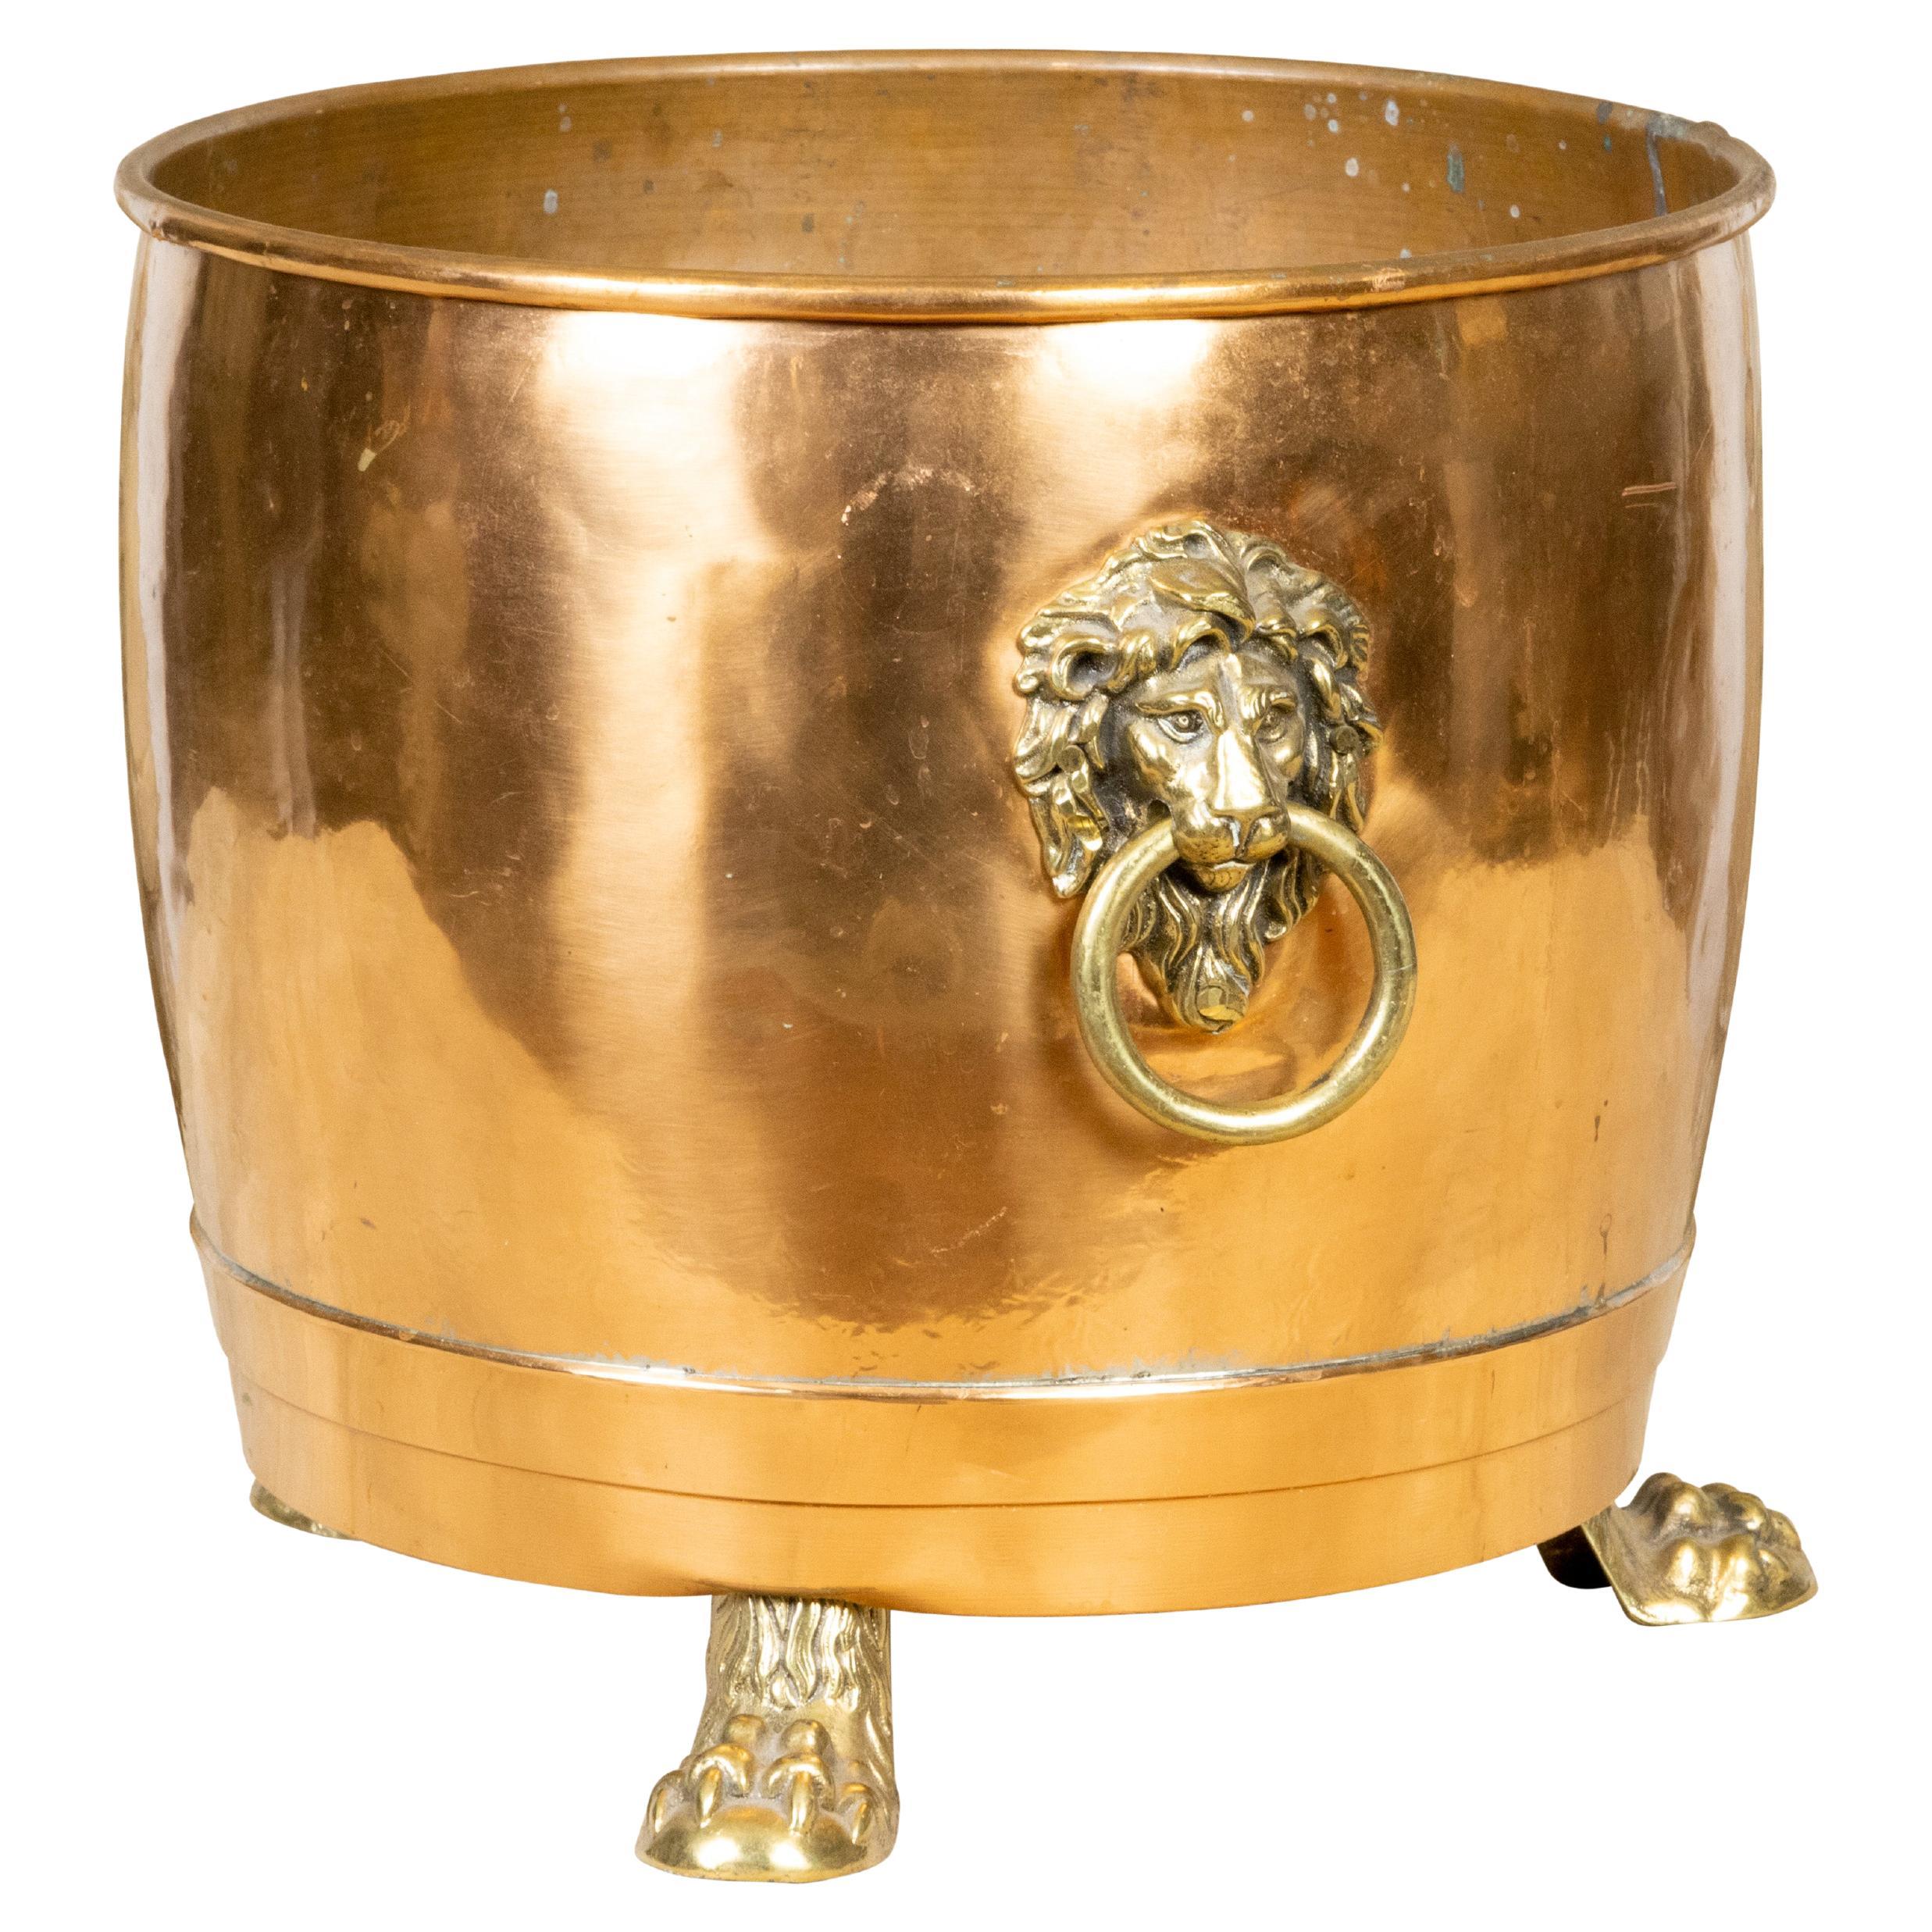 English Turn of the Century 1900s Copper and Brass Planter with Lion Paw Feet